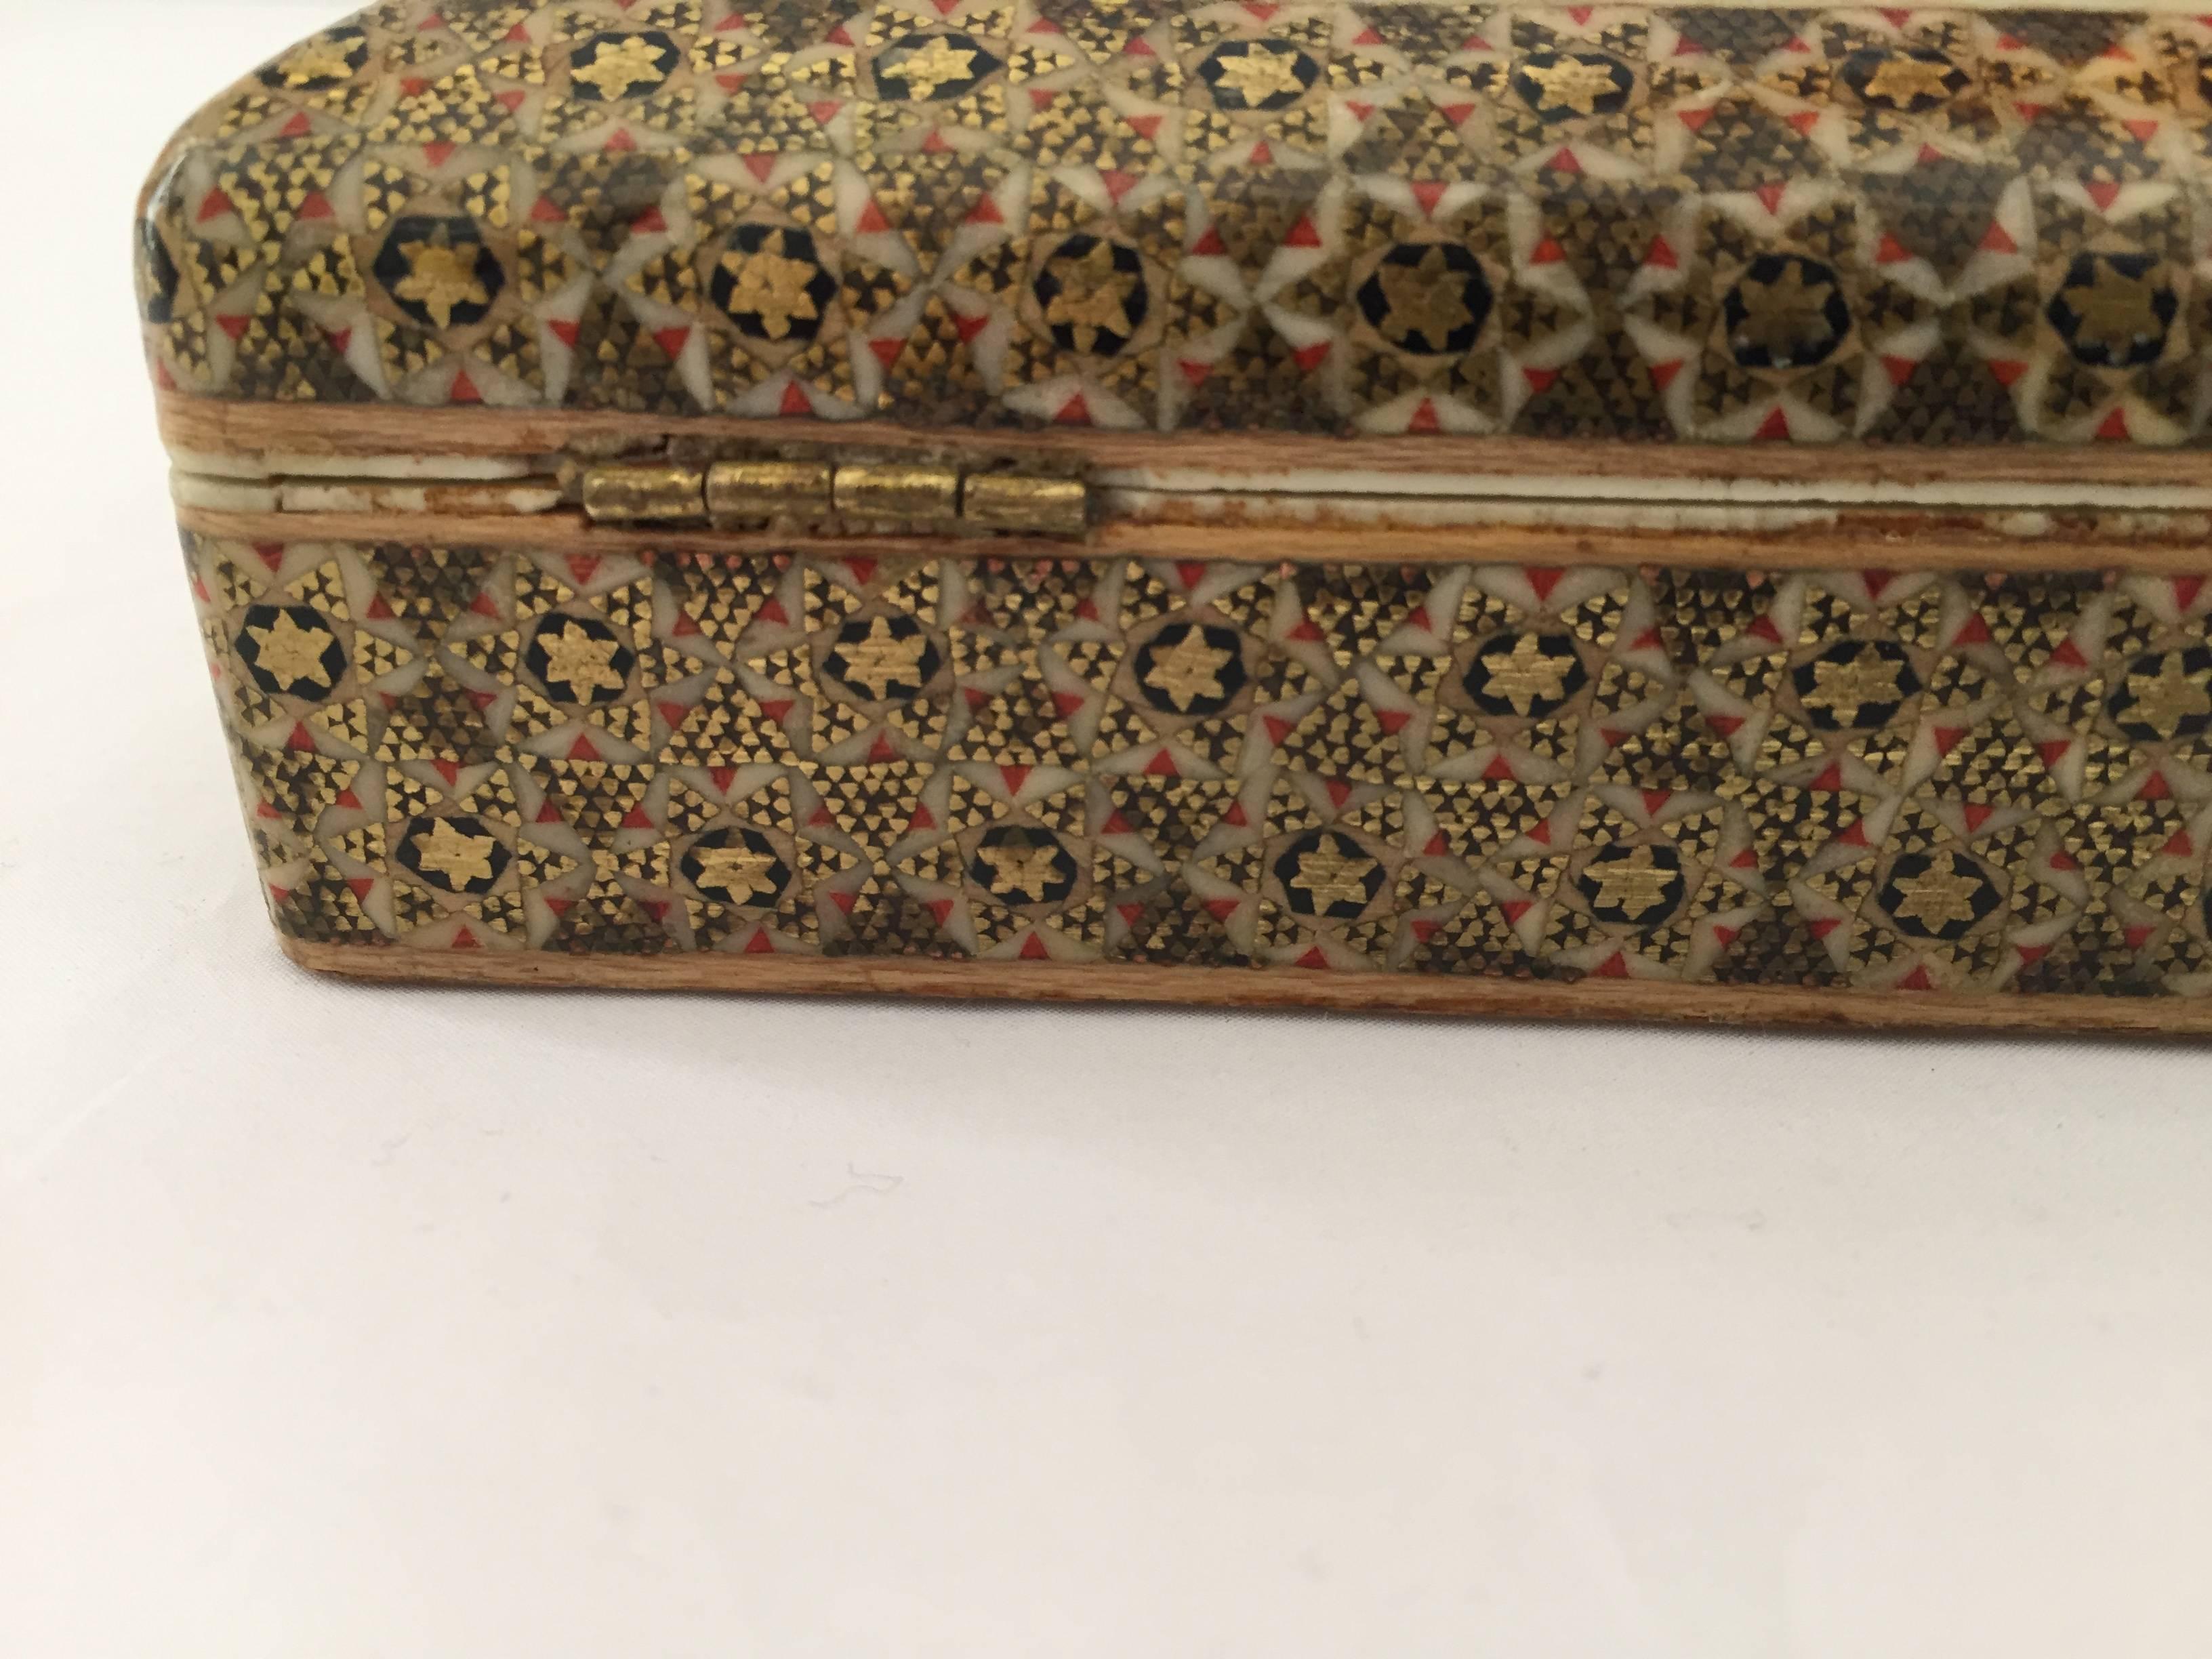 Hand-Crafted Indo-Persian Khatam Micro Mosaic Jewelry Box For Sale